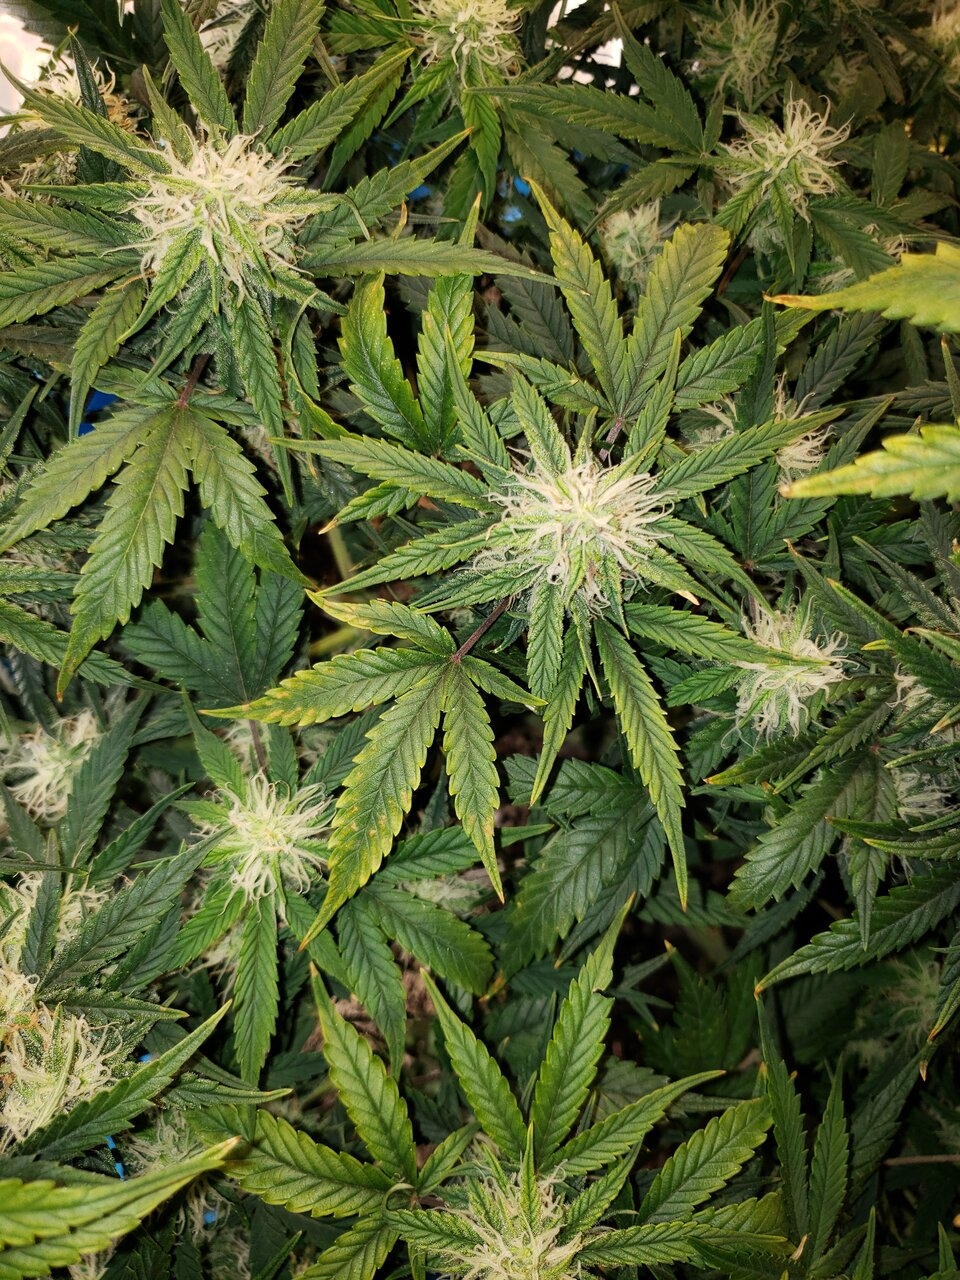 HB Bluedream auto maybe having issues?